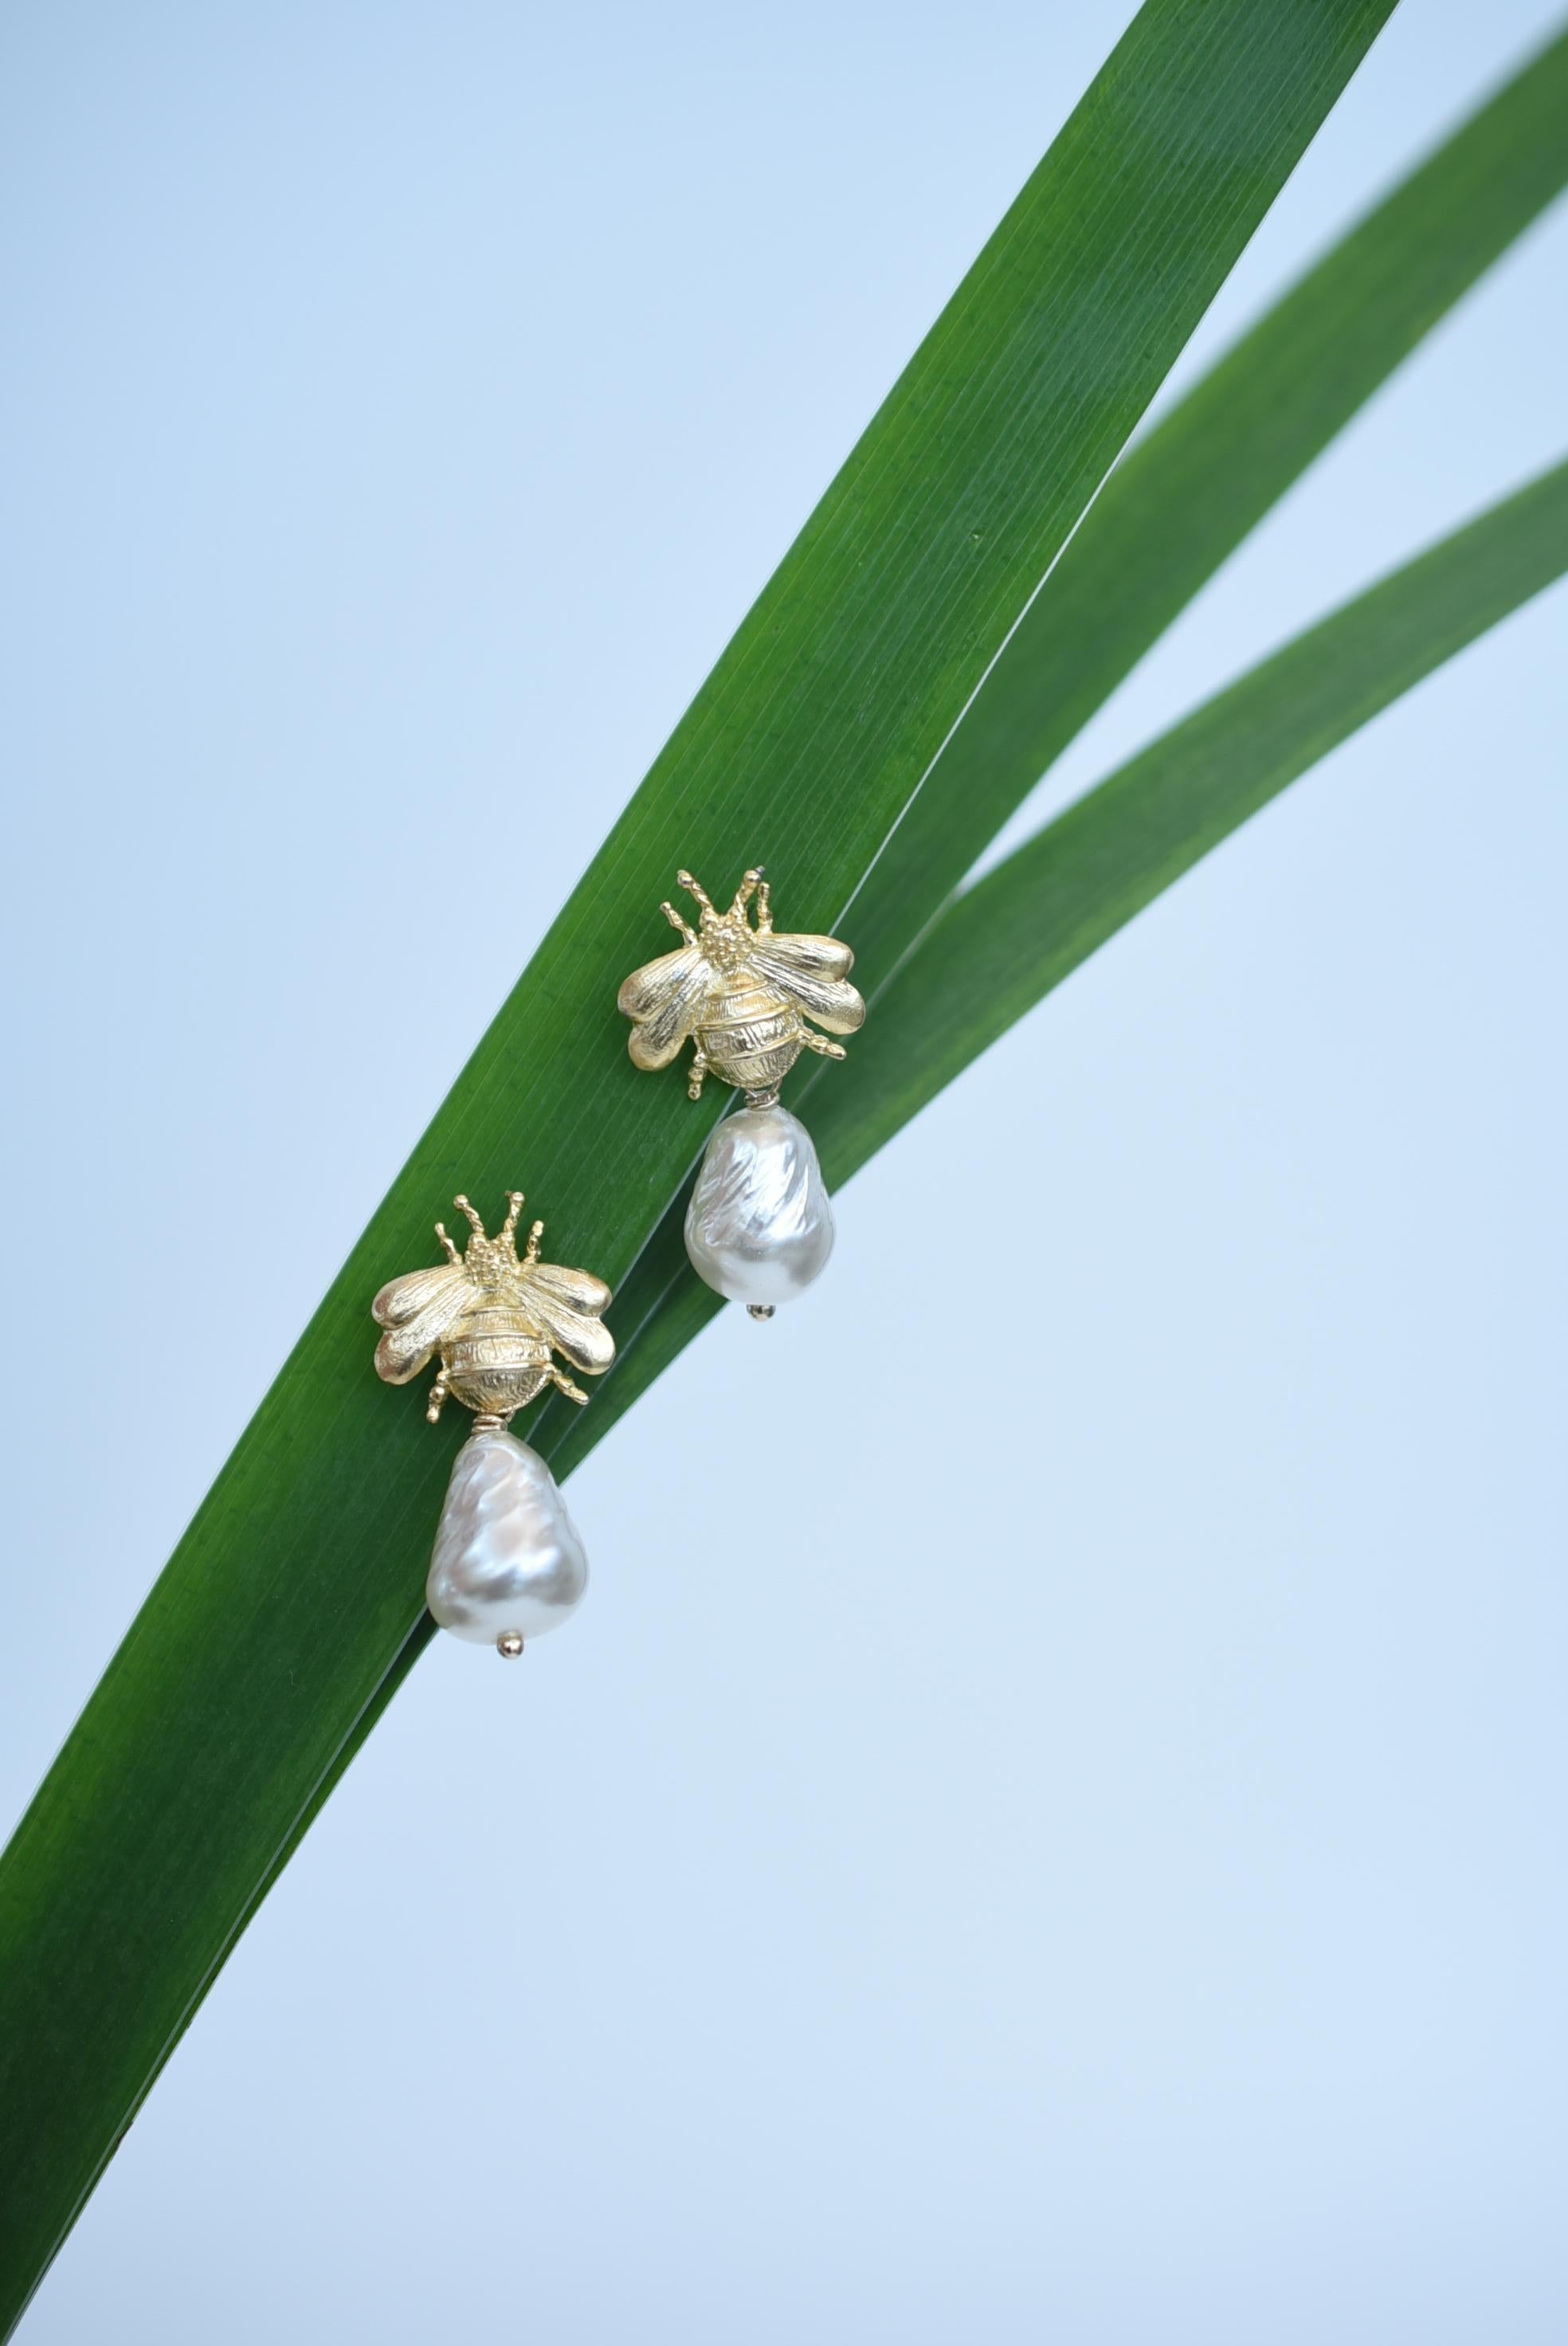 material:Brass,stainless,vintage glass pearl,
size:length 3.3cm / weight each 4g

The motif is a bee, but it is made in a single bright matte gold color, This item is easy to try even for those who do not usually choose animal motifs.
The elegant